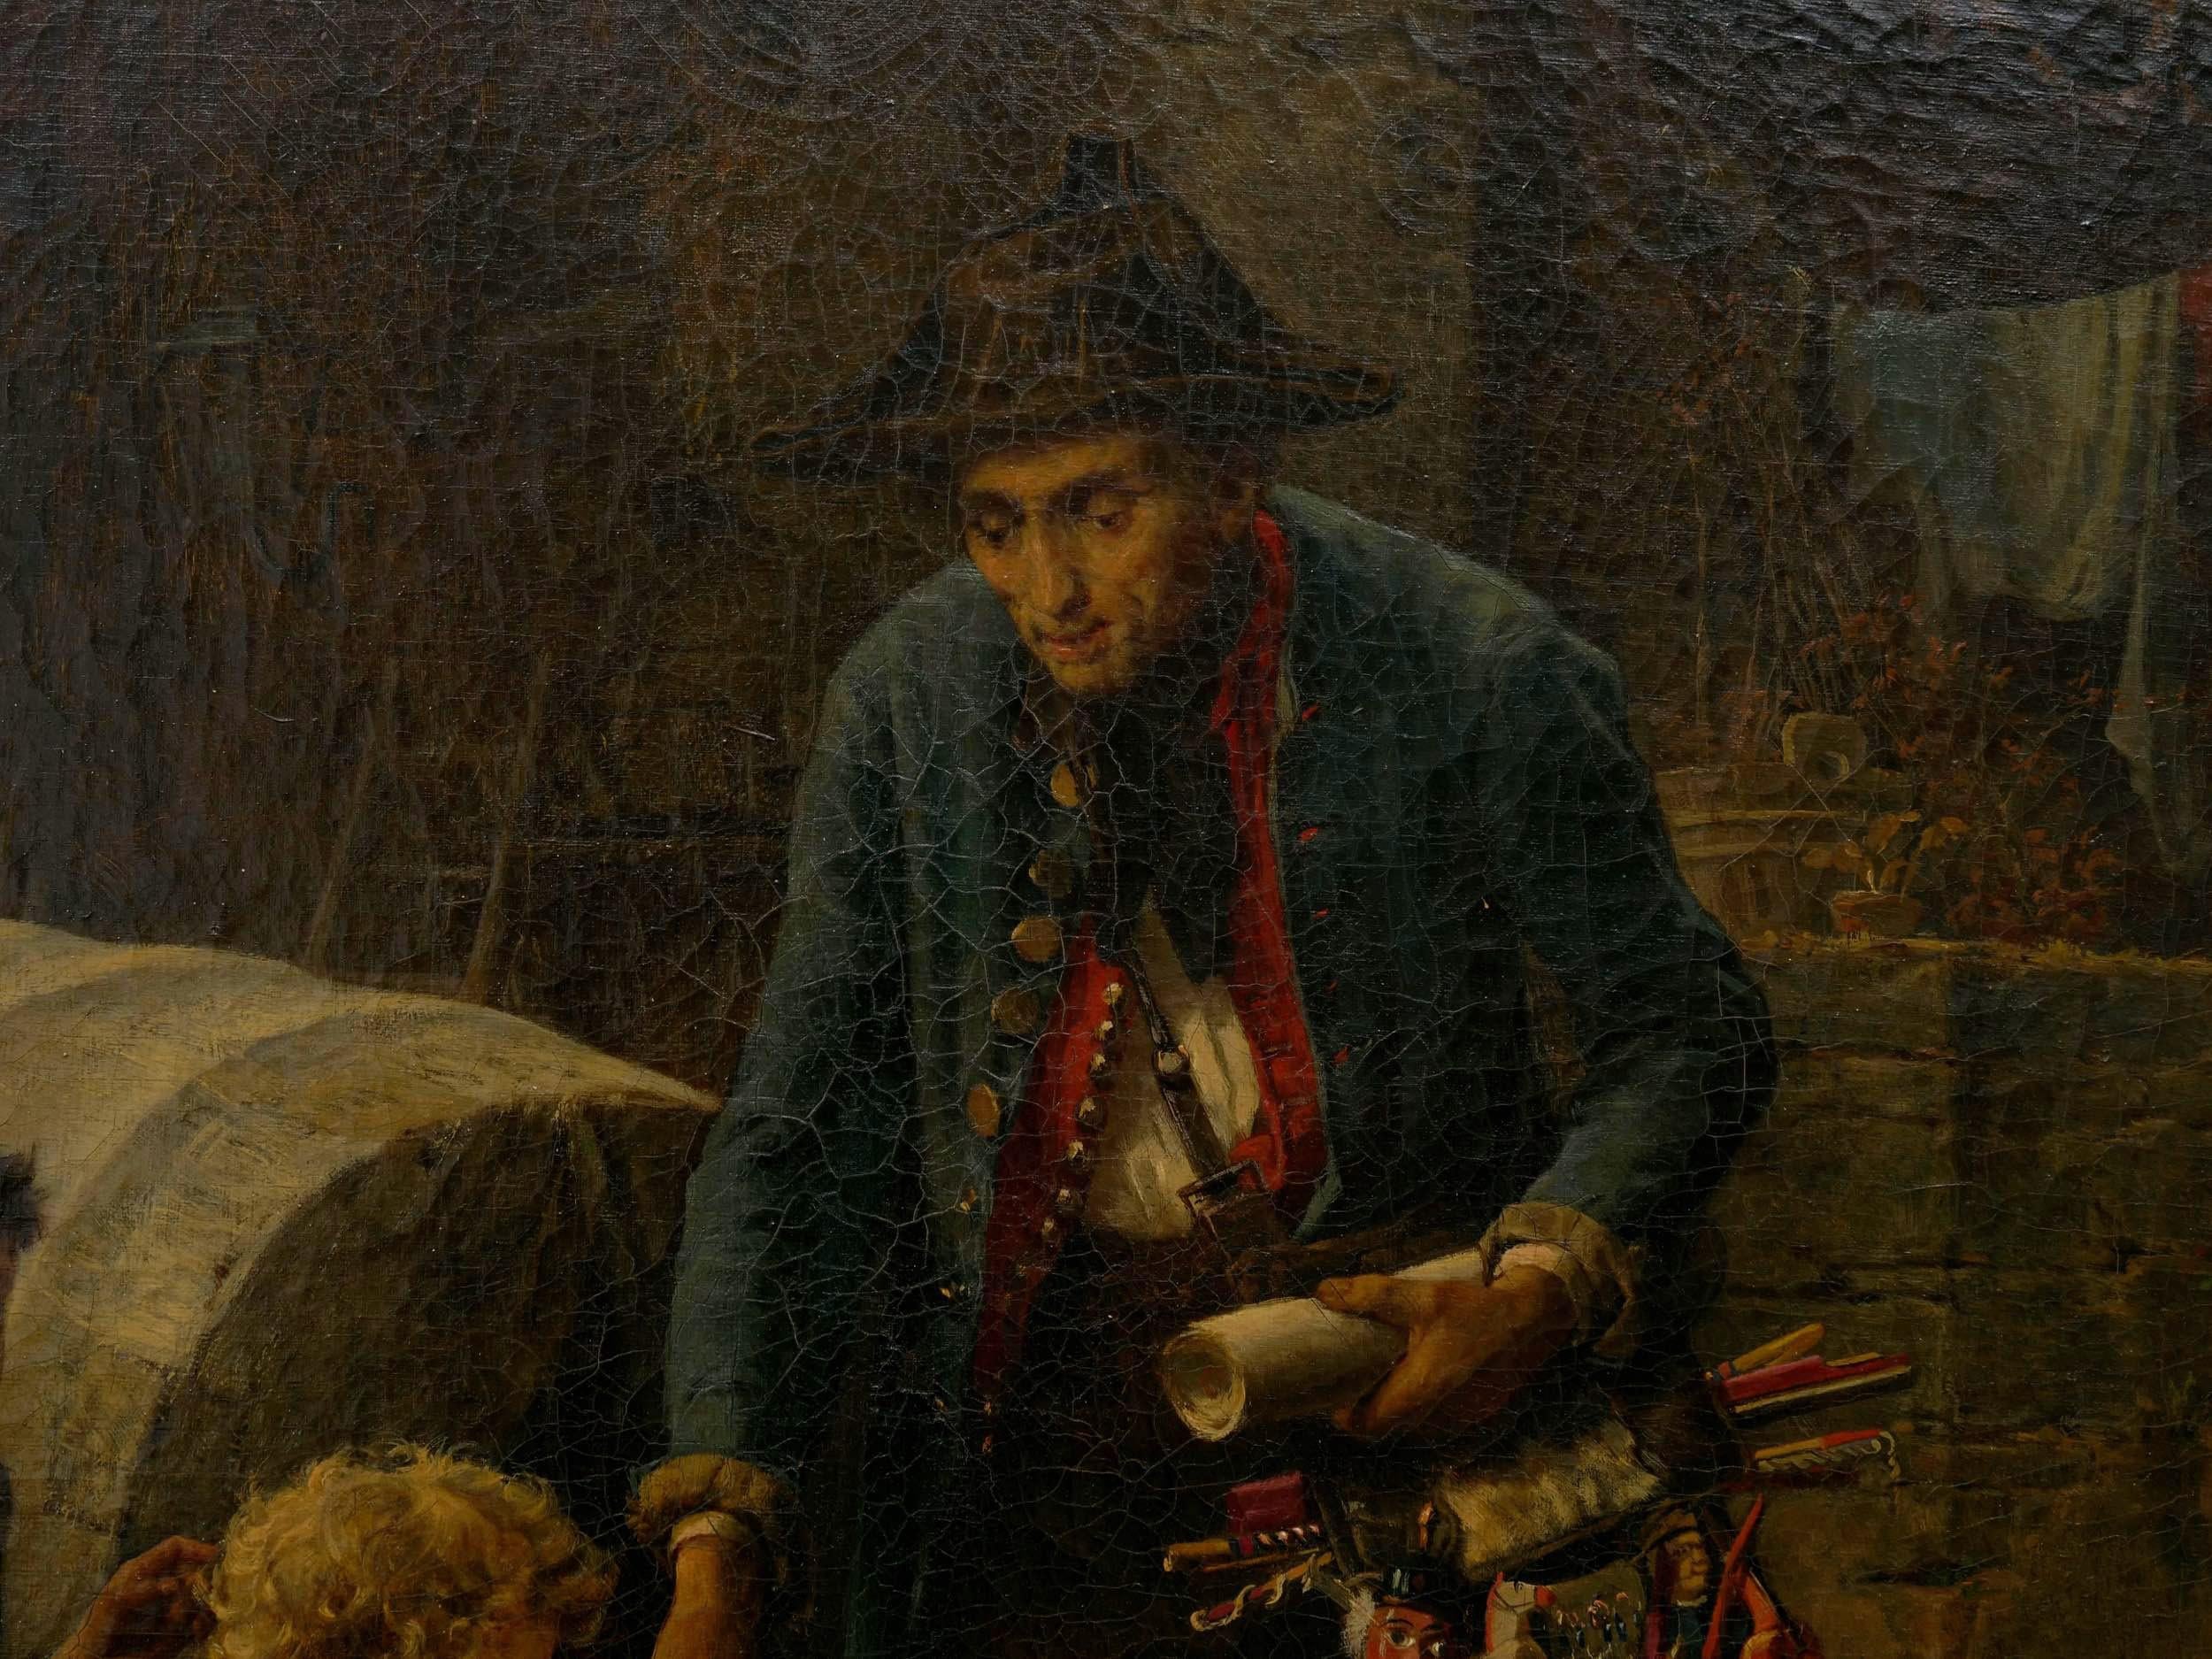 “The Toy Seller” (1874) Antique Oil Painting by Fritz Beinke (German, 1842-1907 5